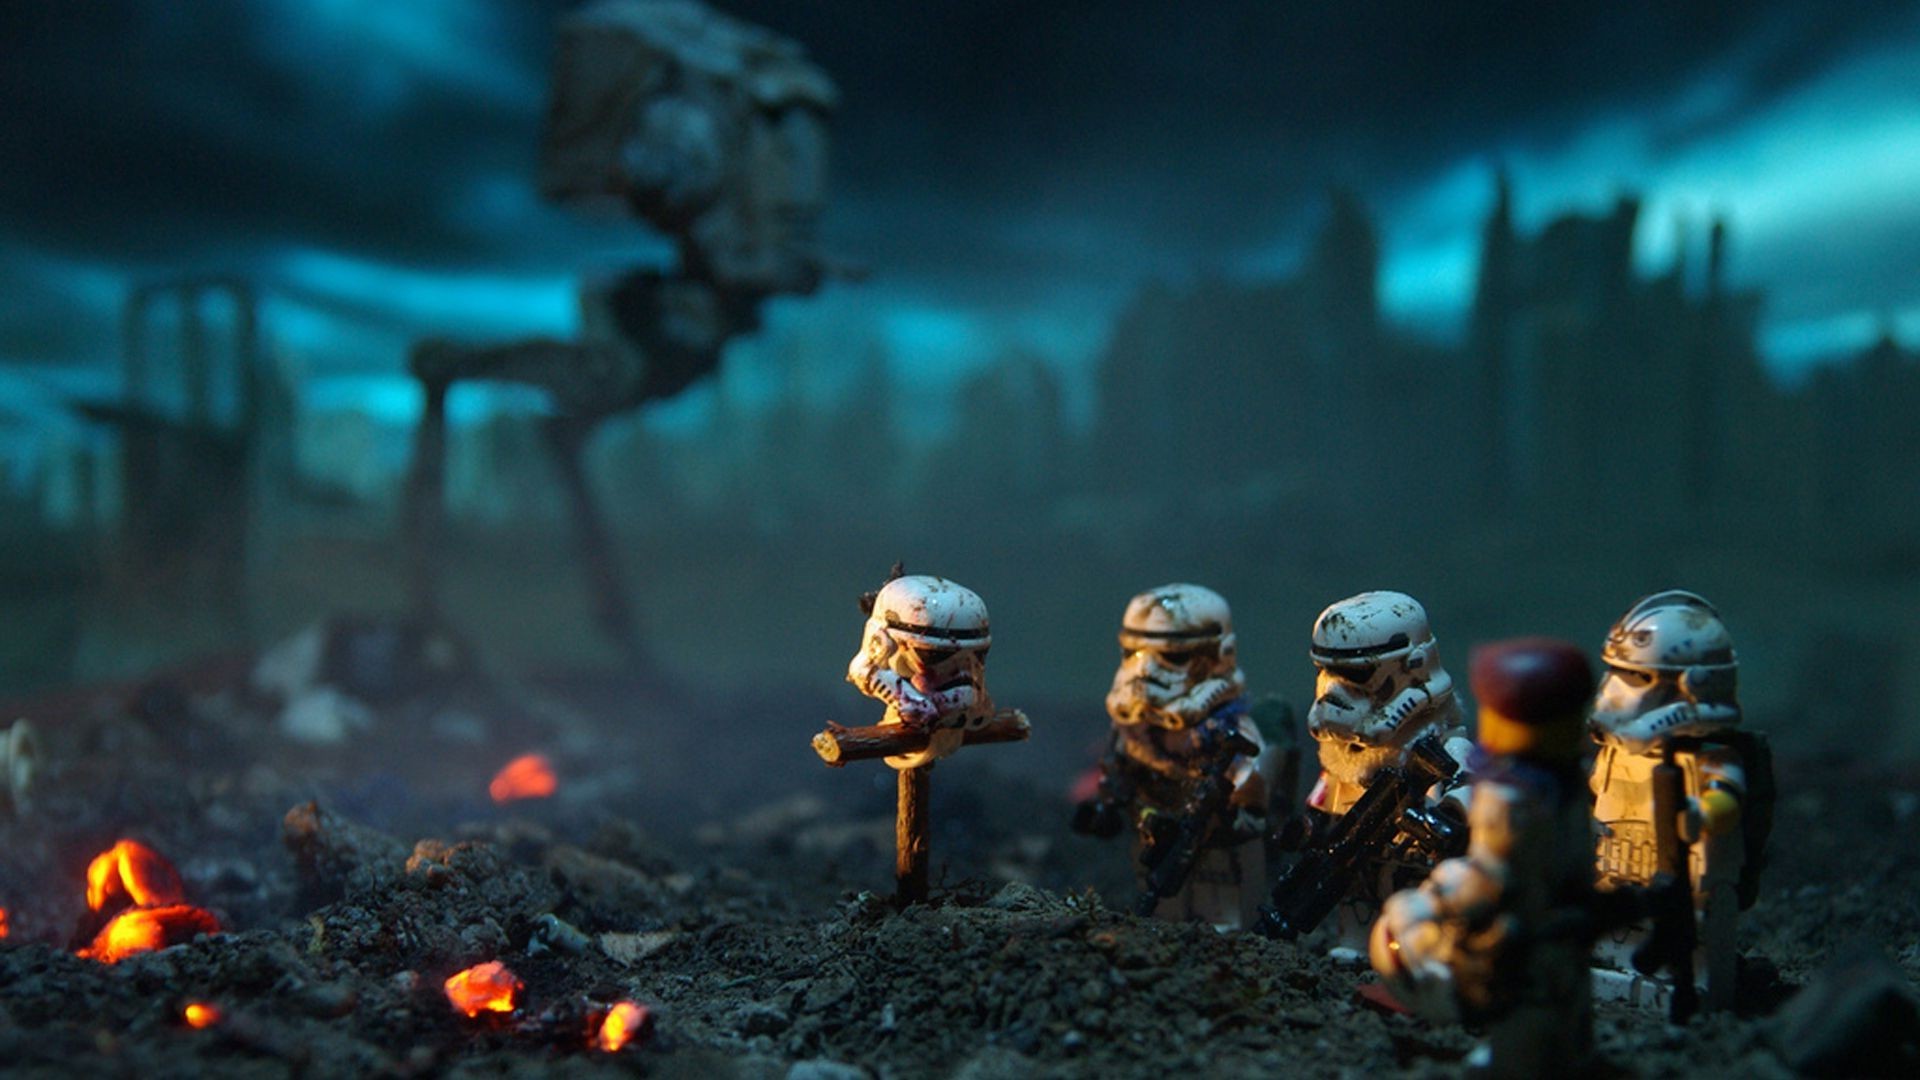 1920x1080 Lego Star Wars Wallpapers Background For Widescreen Wallpaper